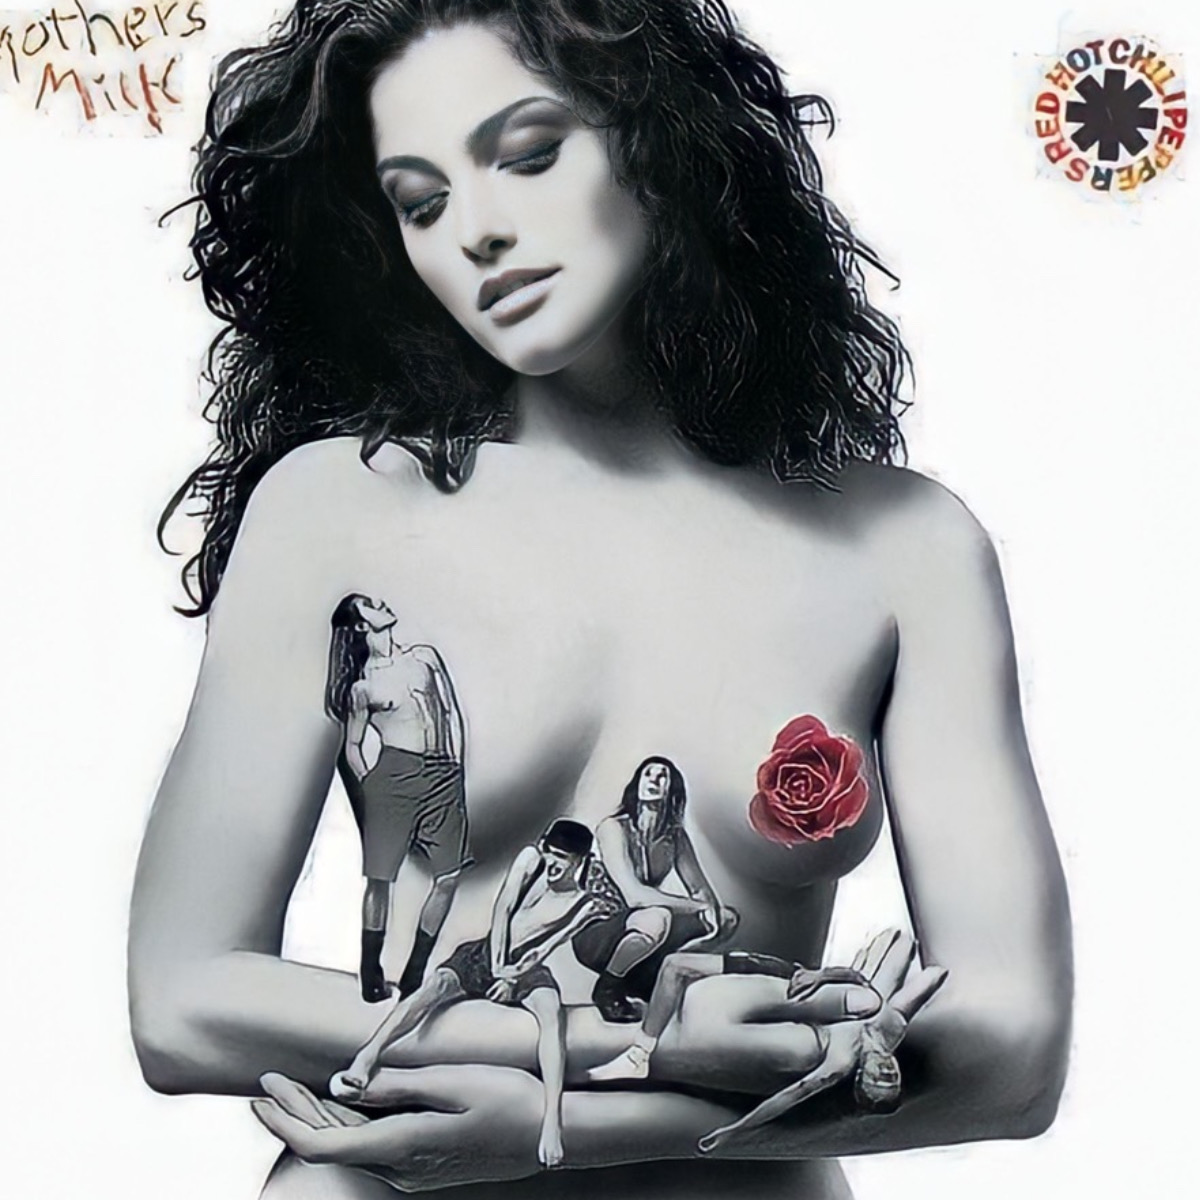 A capa do álbum "Mother's Milk", do Red Hot Chili Peppers.